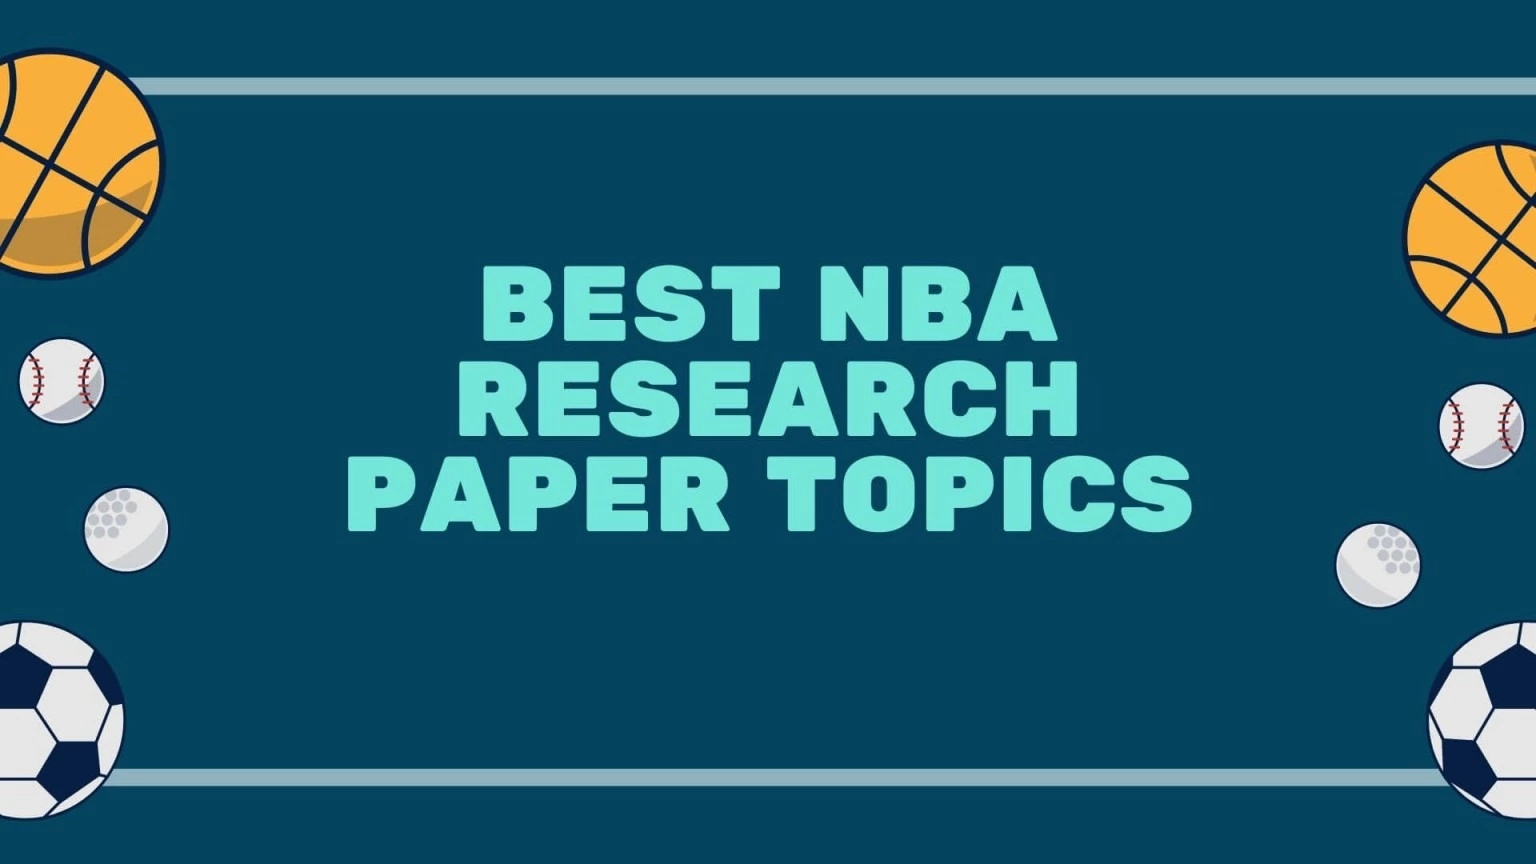 The best nba research paper topics